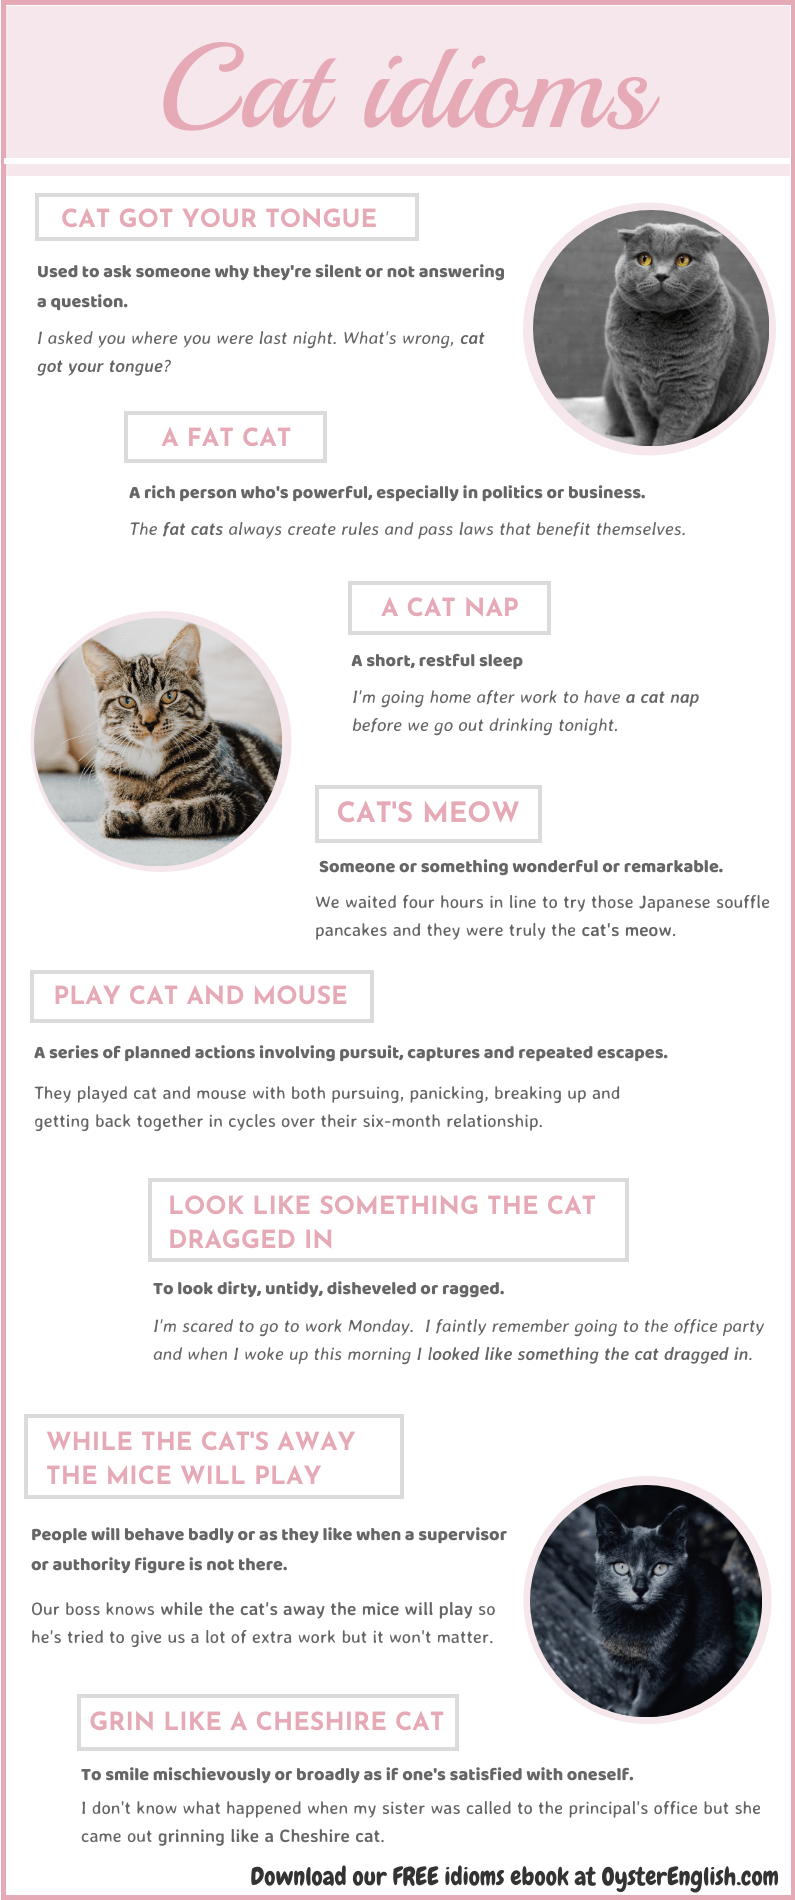 An infographic with photos of 3 real cats and the 8 idioms listed on this page with definitions and sentence examples.